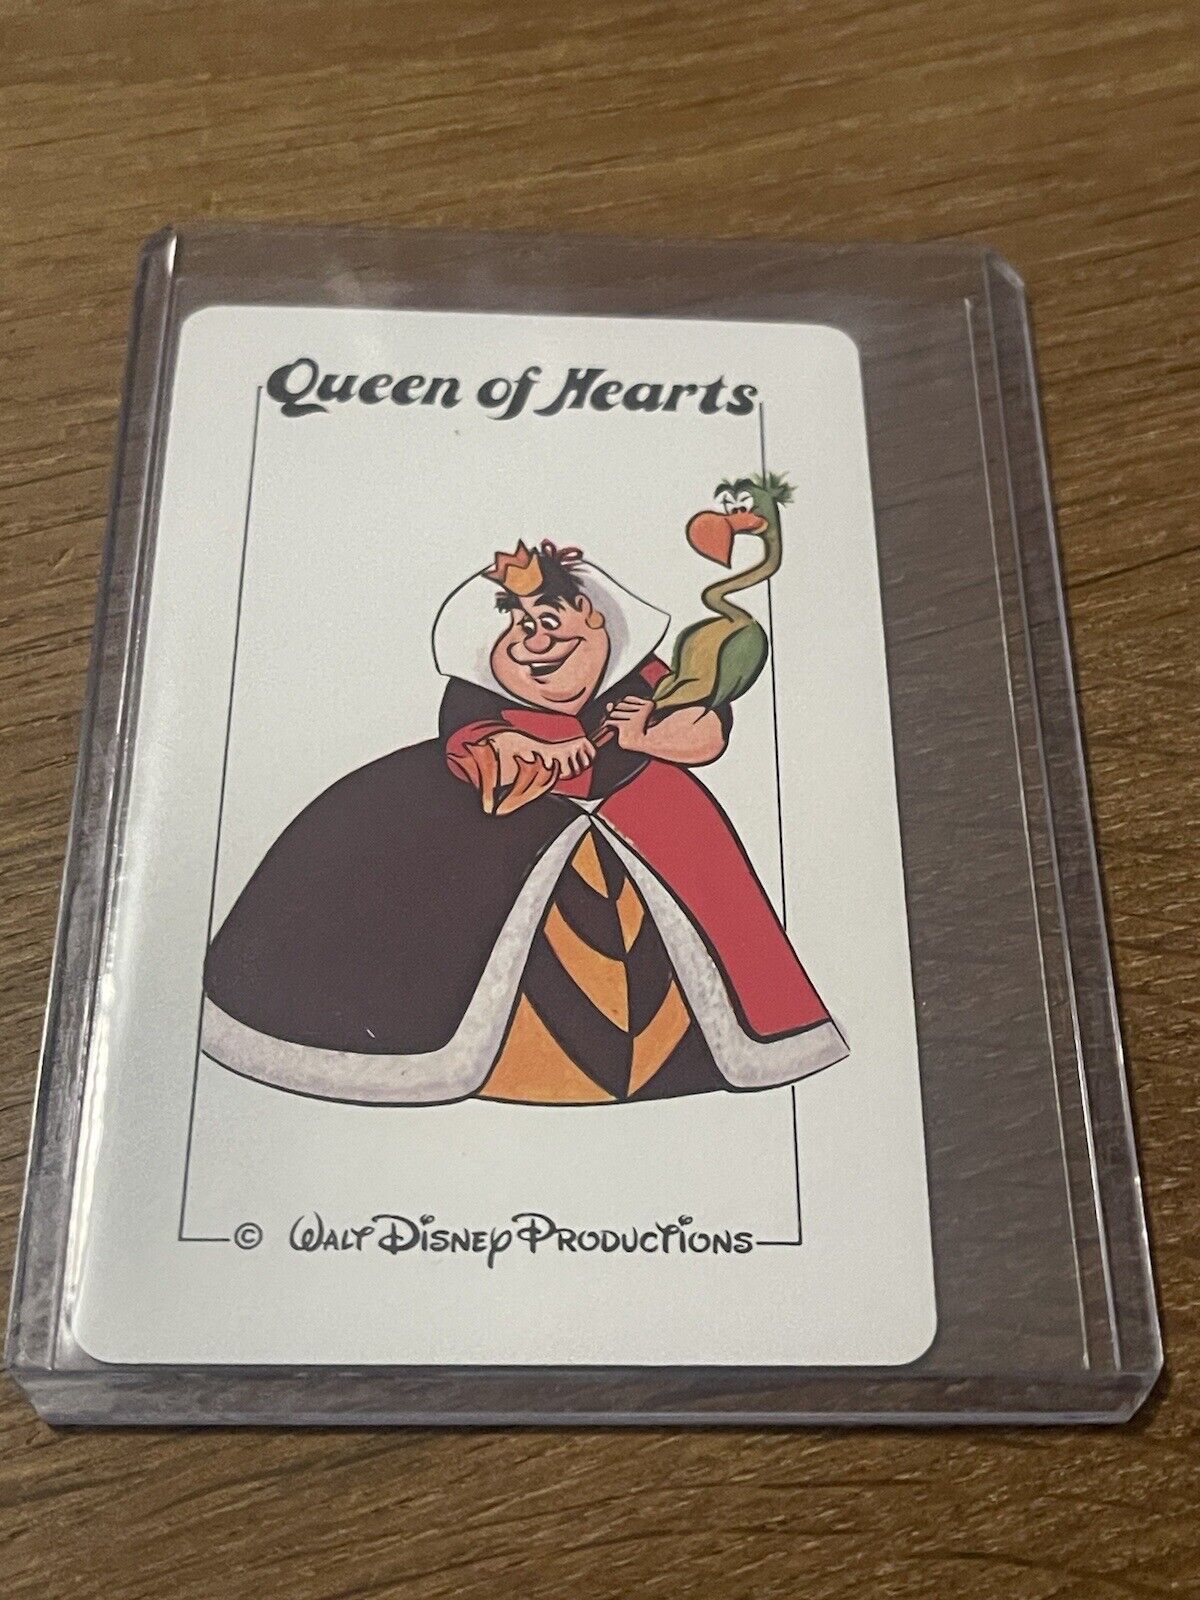 Authentic Rare Vintage Walt Disney Productions “The Old Witch” Queen Hearts Card